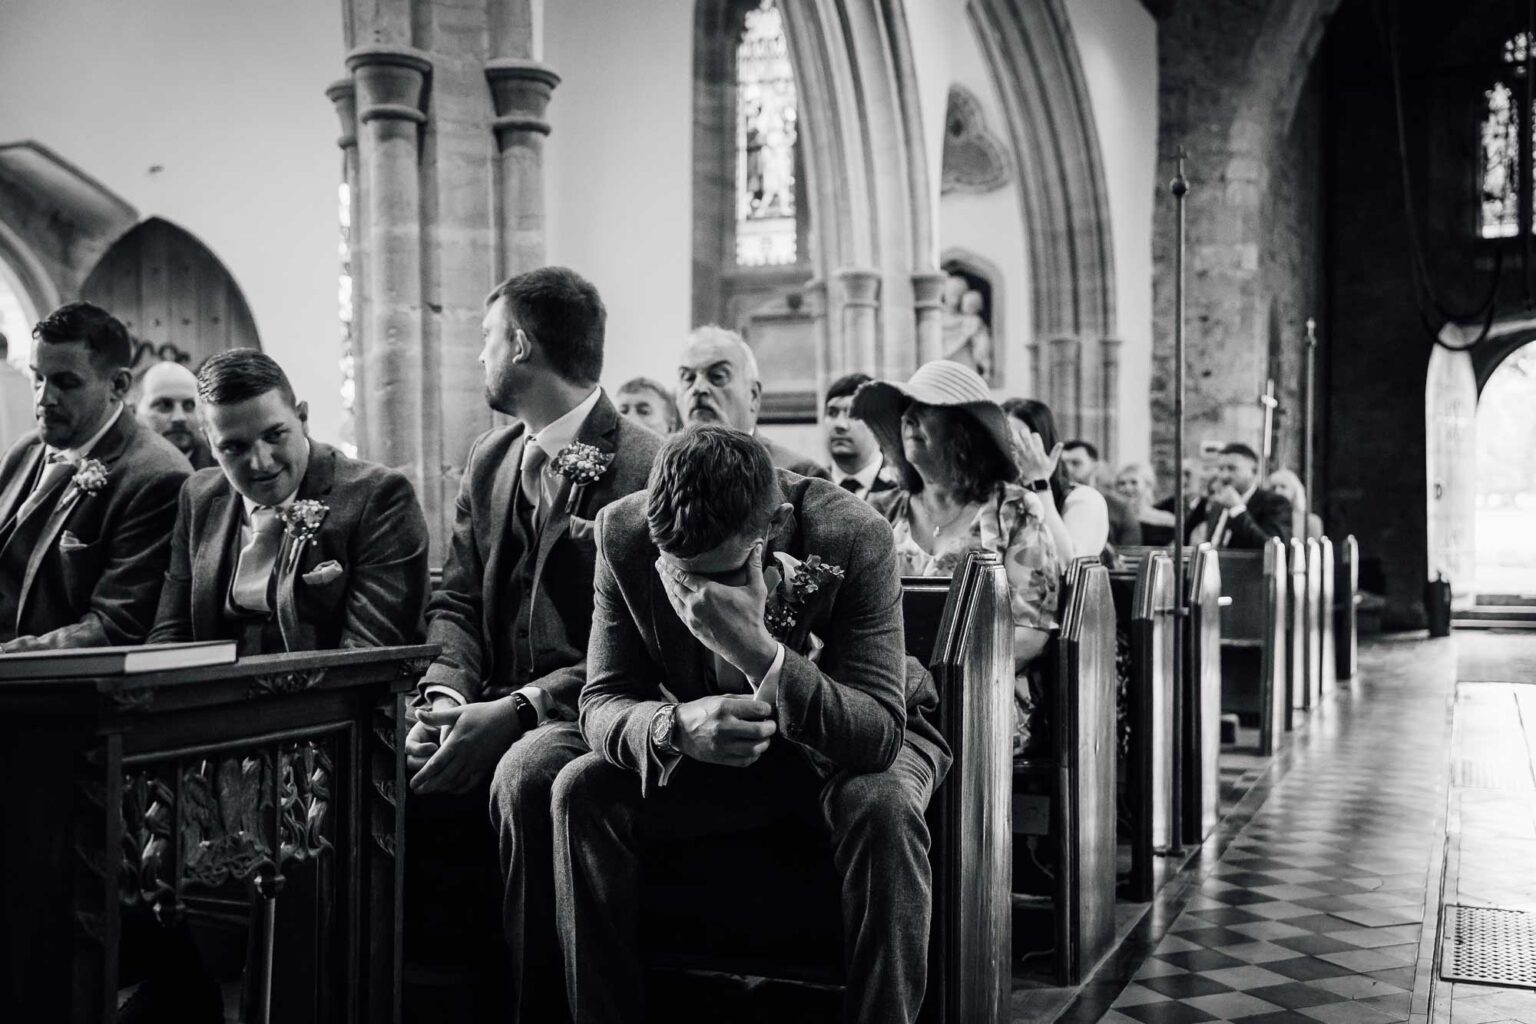 Nerves getting to the Groom as he awaits his brides arrival in church